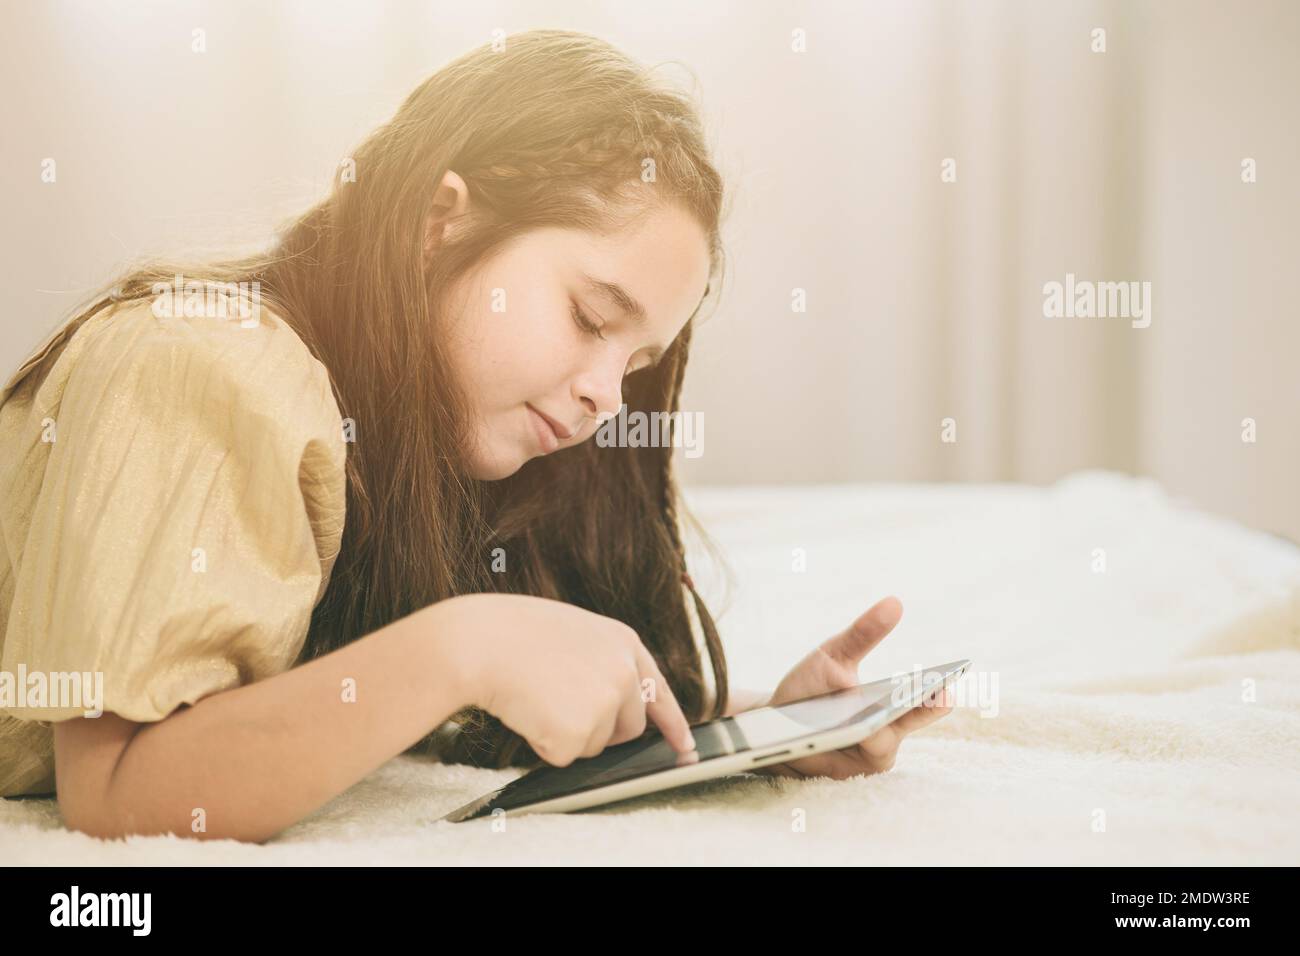 child laying on bed using tablet for self learning education at home. cute girl play holiday games on touchscreen device. Stock Photo